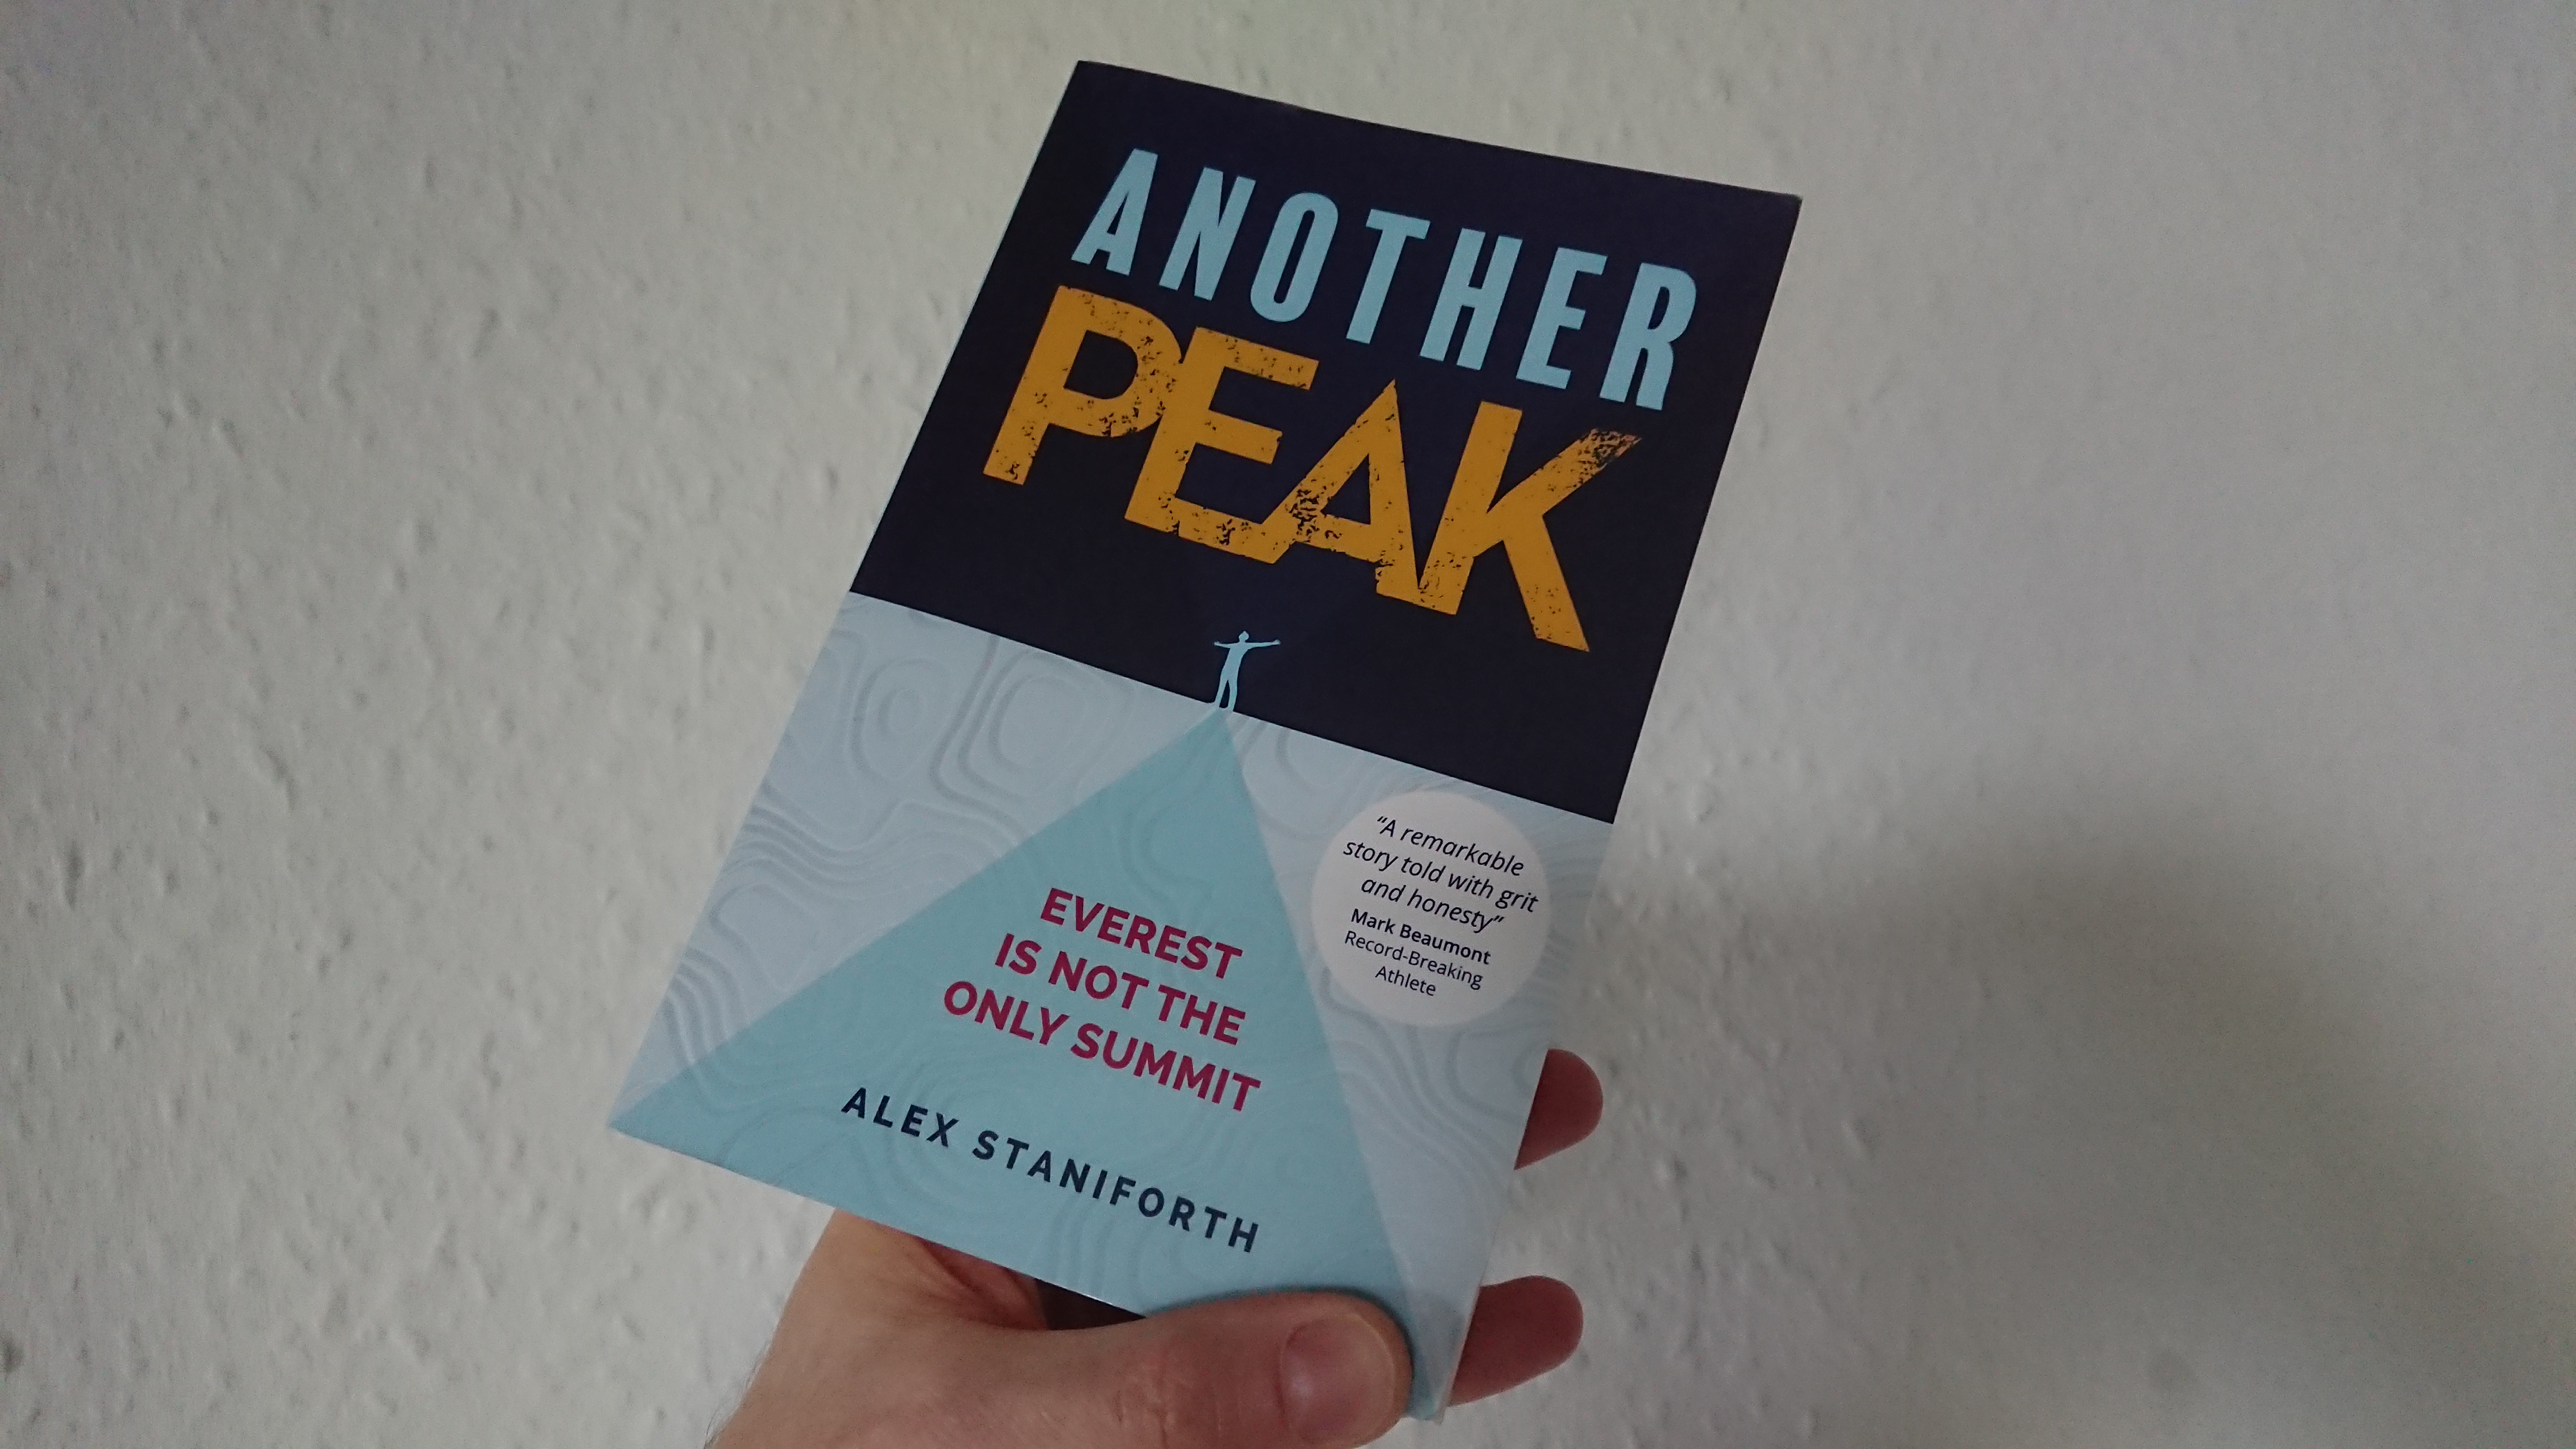 Fireside Reading: Another Peak by Alex Staniforth